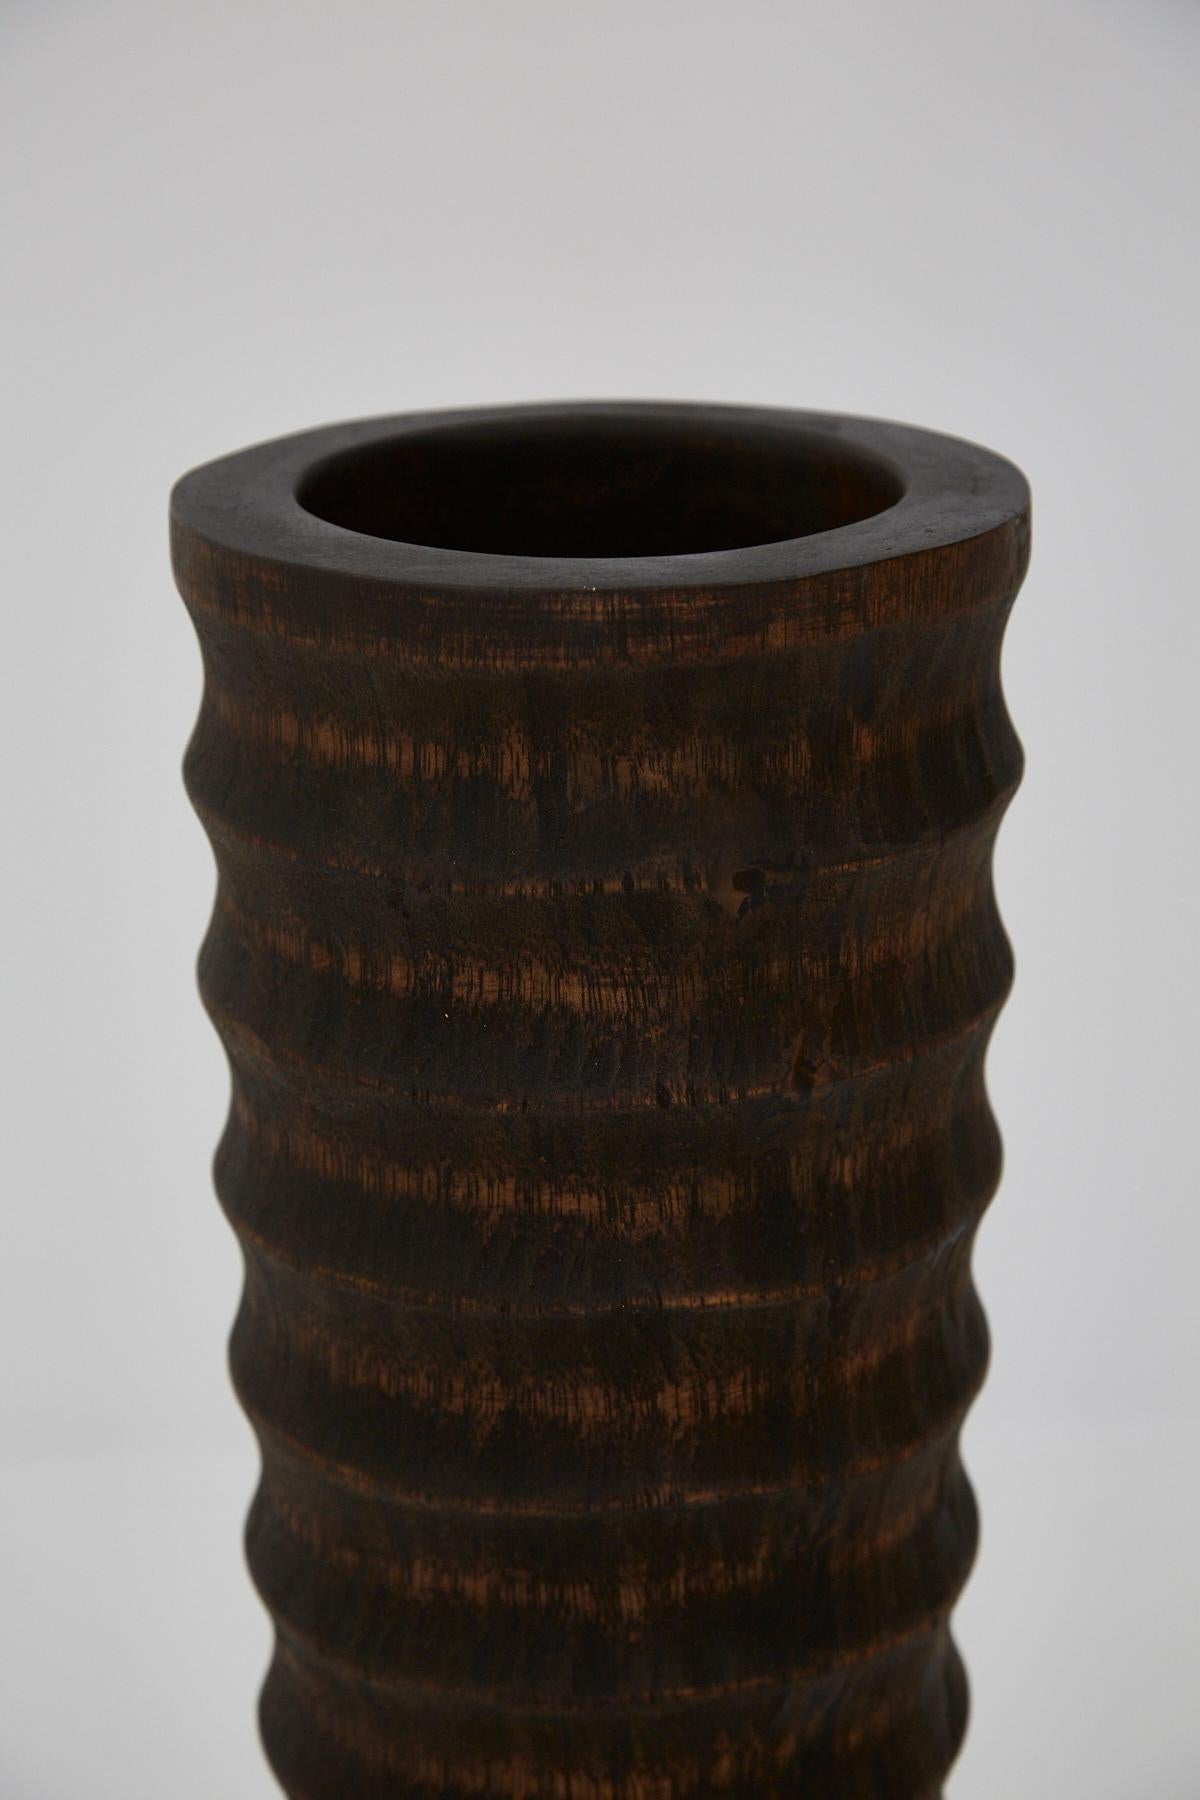 Tall 36 in. hand carved horizontally ribbed wooden floor vase with dark finish. Well for plants measures approx. 8 in. deep and a plastic liner is included.